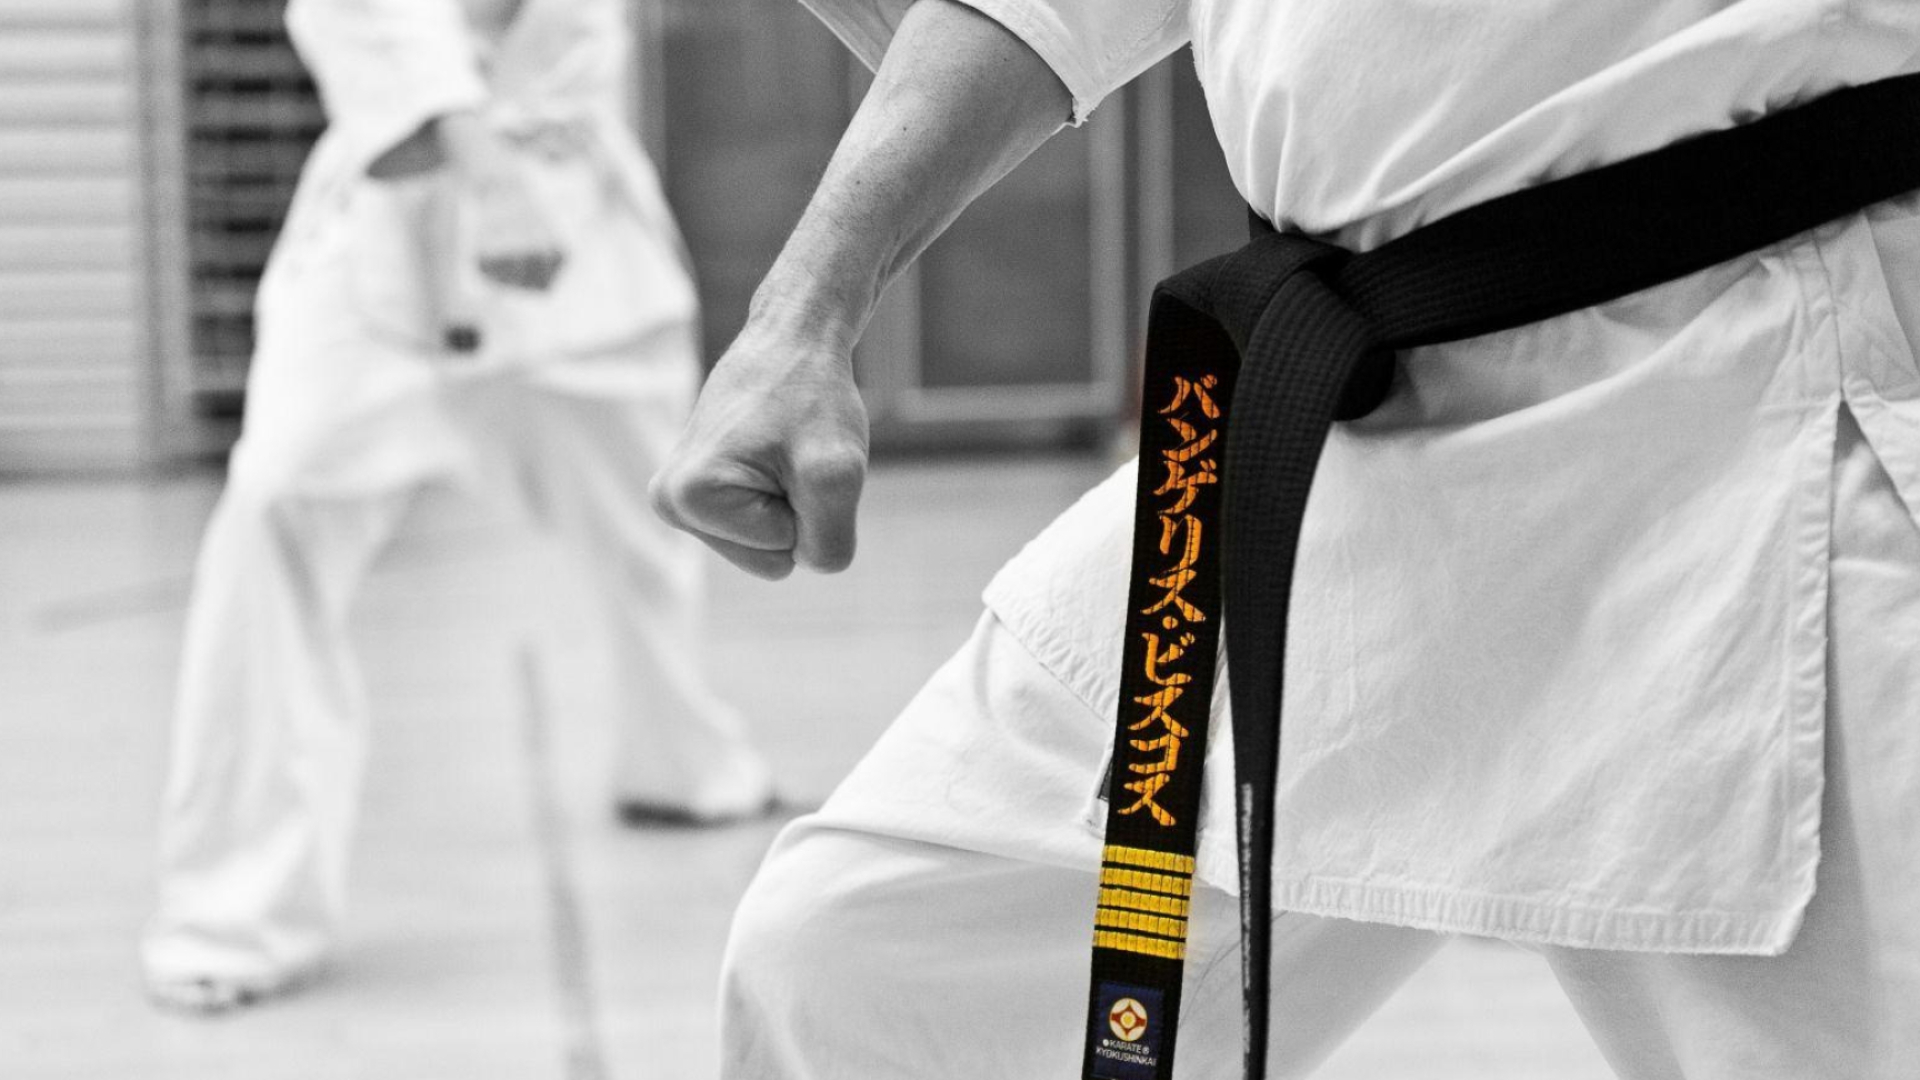 Martial Art: Unarmed combat sport Judo, The body and mind training, In Olympics since 1964, Black belt. 1920x1080 Full HD Background.